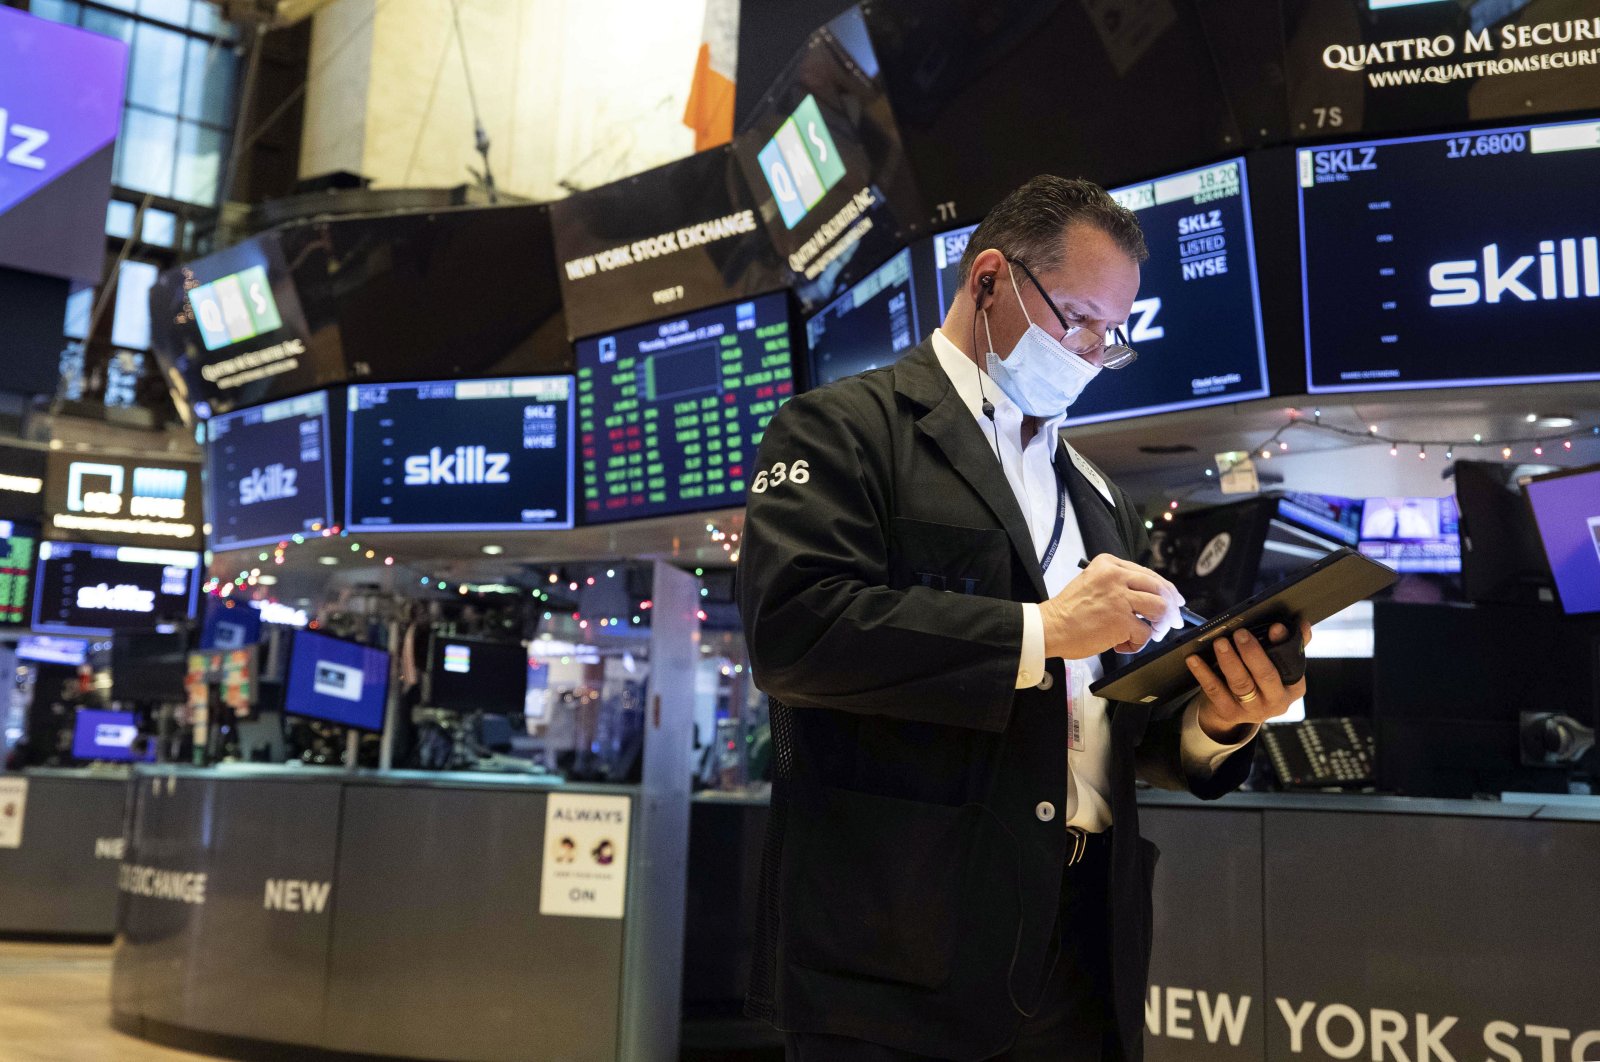 In this photo provided by the New York Stock Exchange, trader Edward Curran works on the floor, Thursday, Dec. 17, 2020. (Colin Ziemer/New York Stock Exchange via AP)